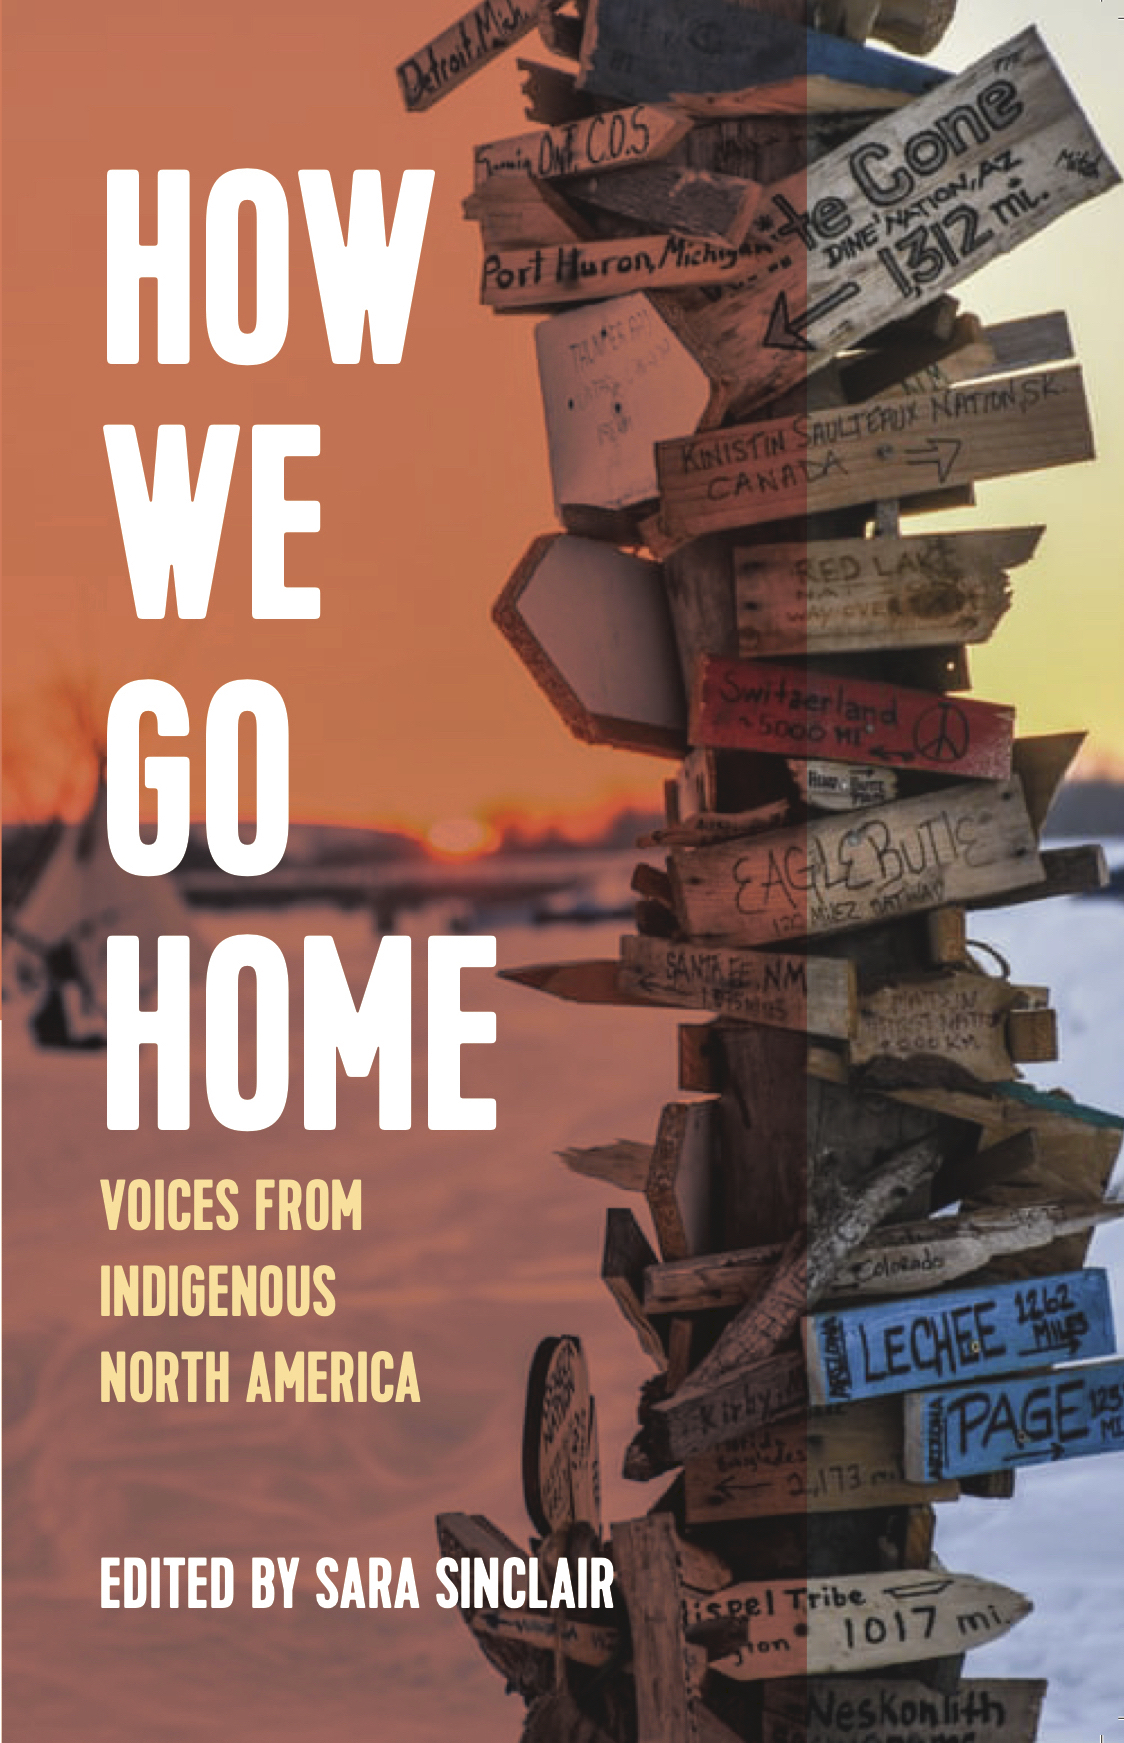 Book Club Discussion Questions: How We Go Home